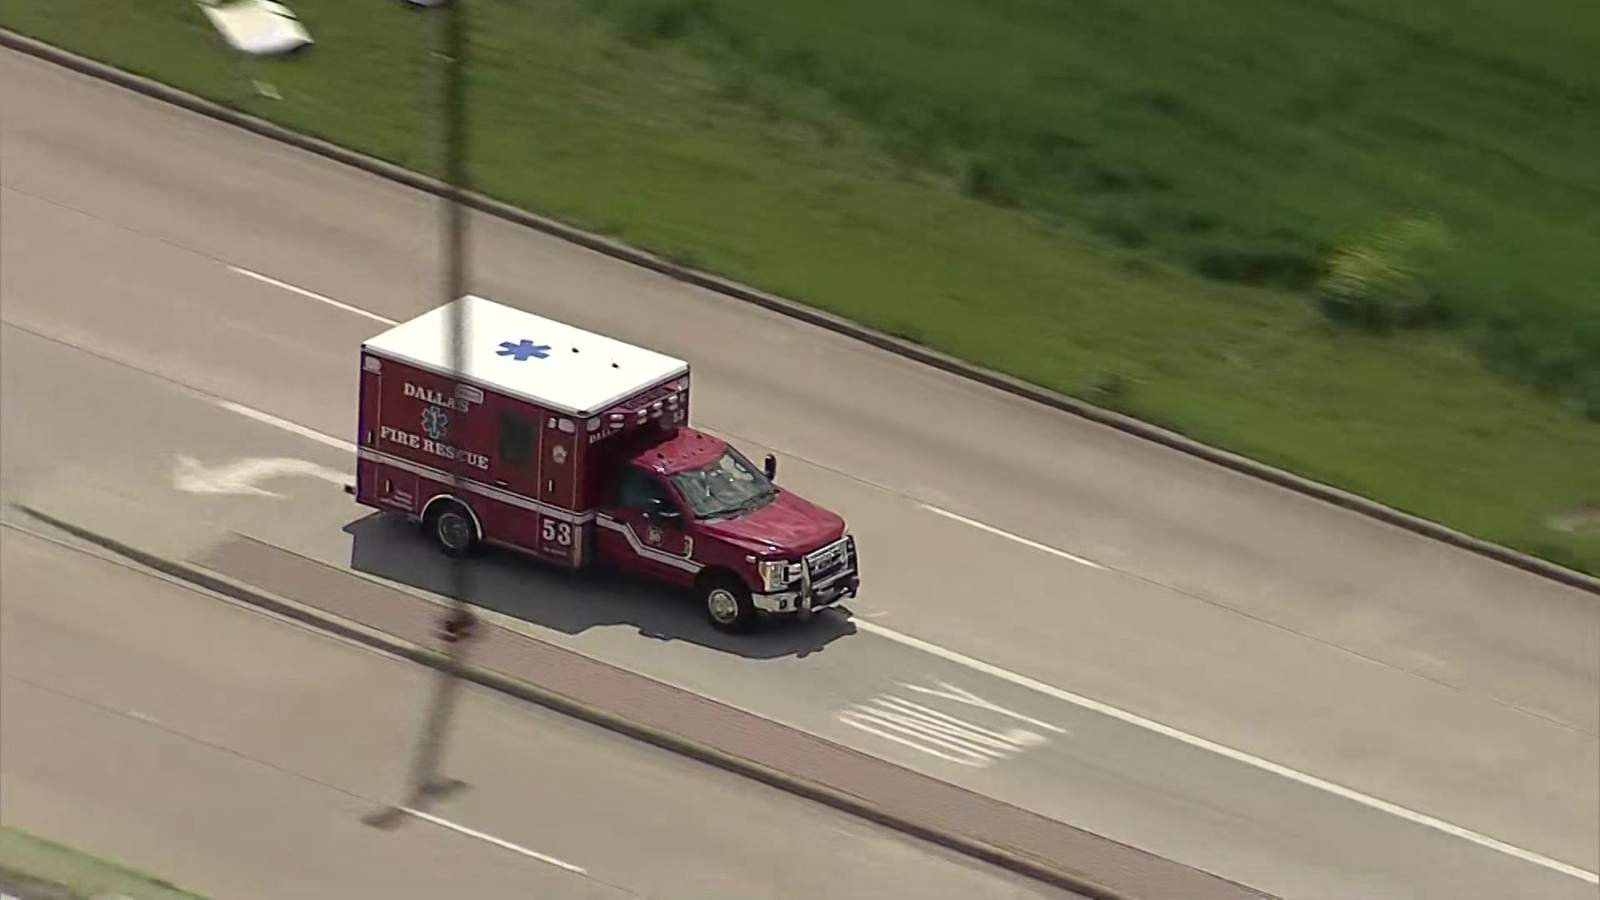 Chase ends after driver gets stuck in stolen ambulance, tries to escape on foot in Dallas